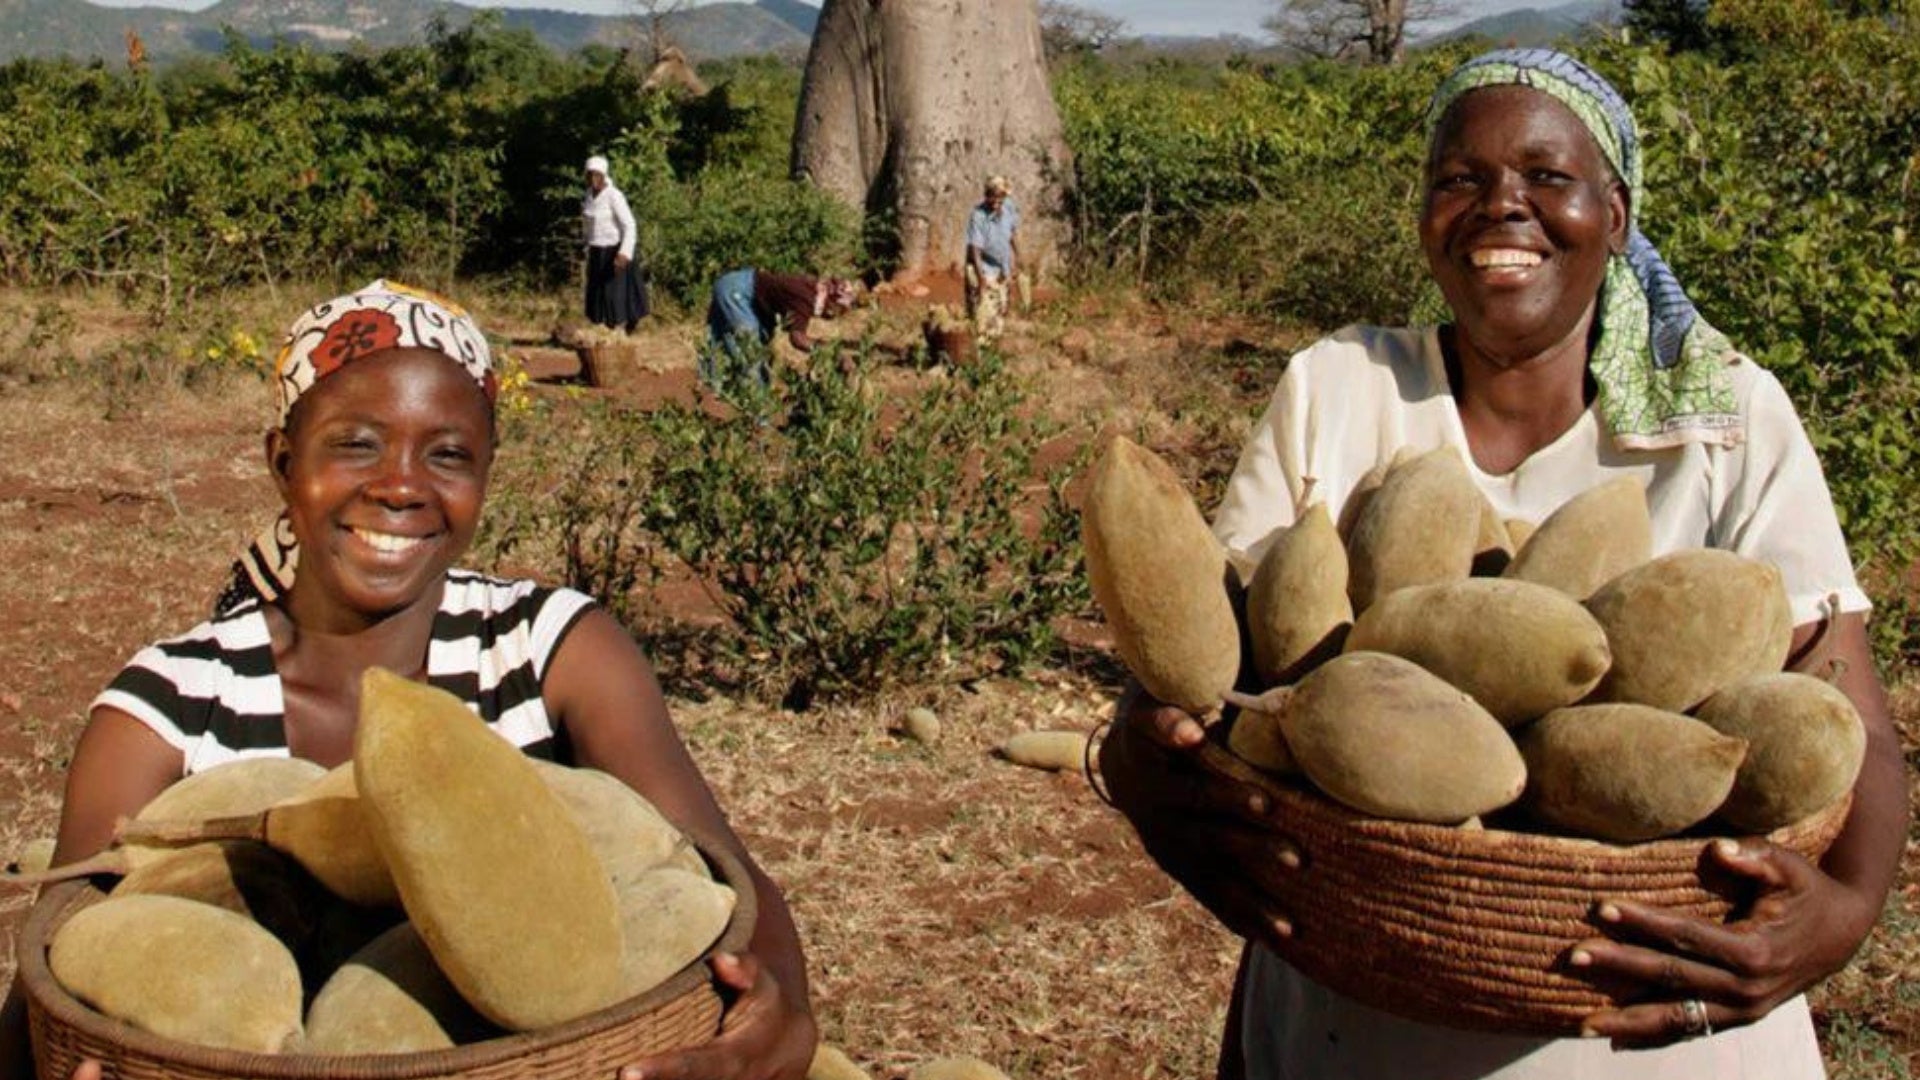 Where Does Our Baobab Come From?